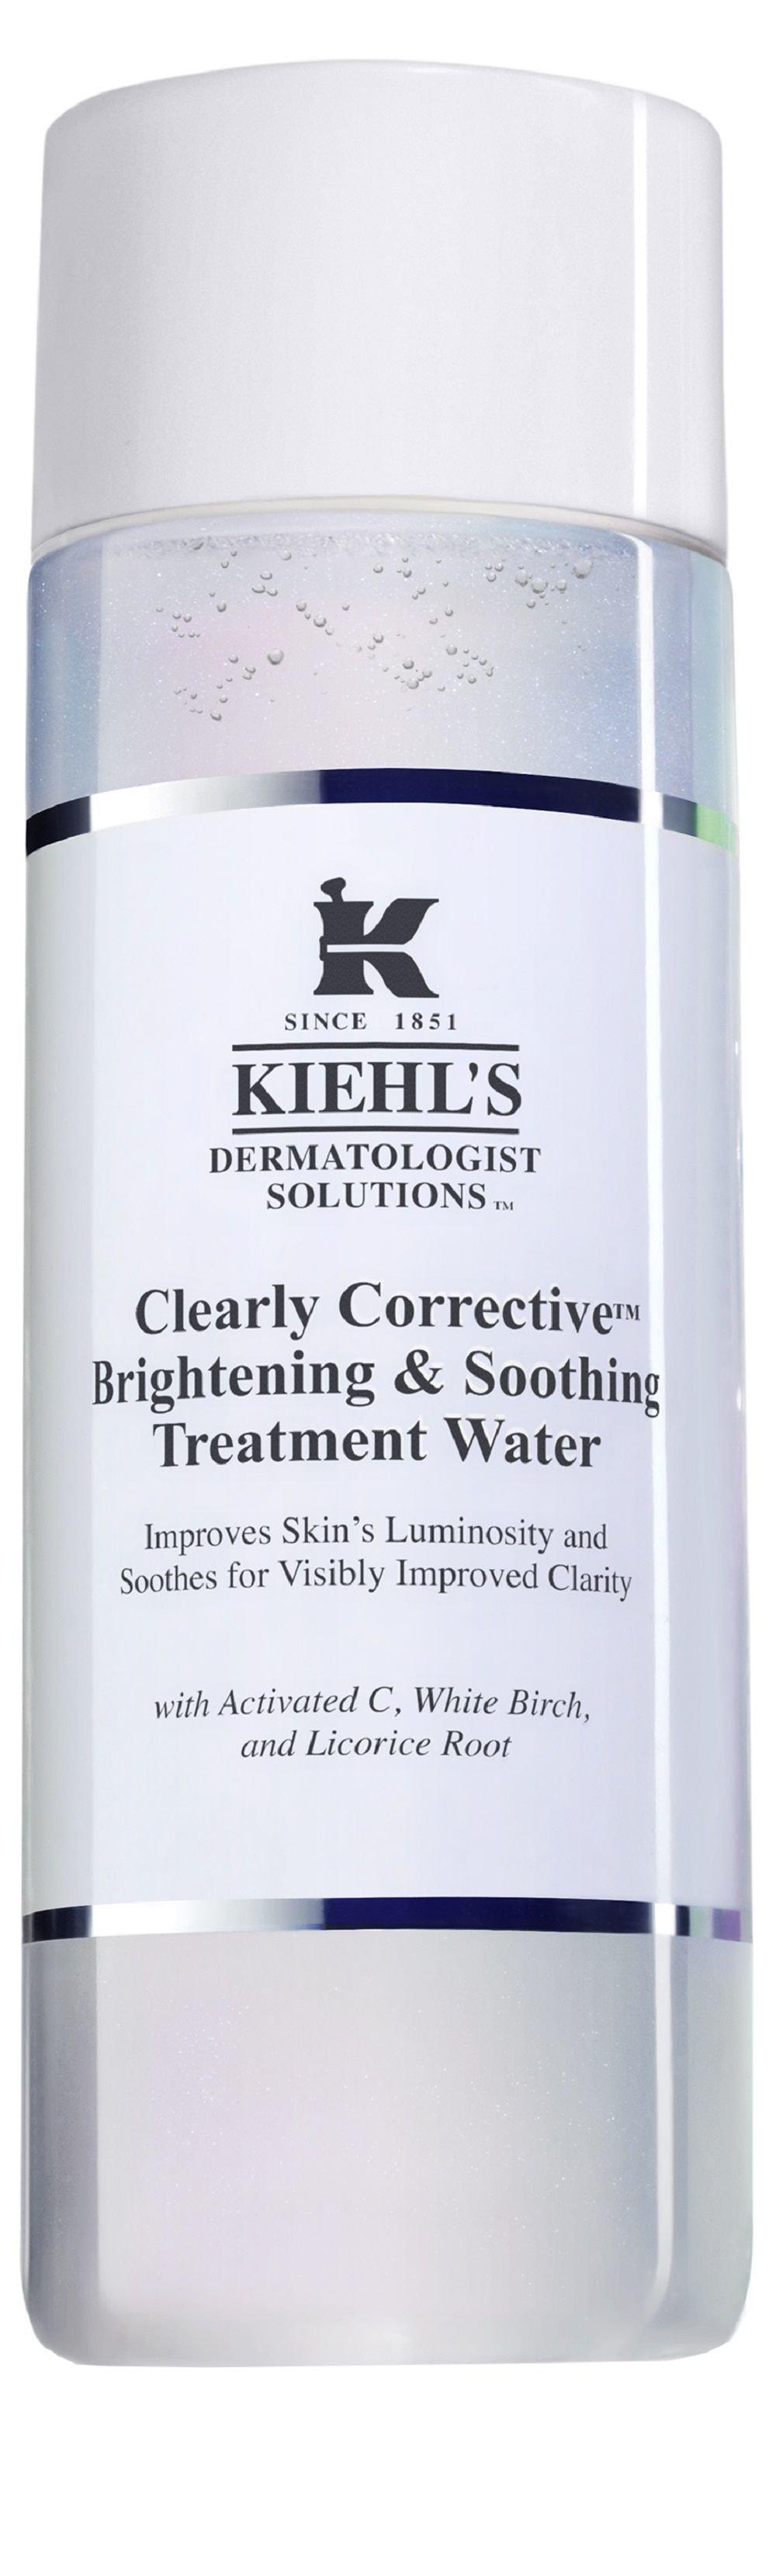 Image of Kiehl's Clearly Clearly Corrective Brightening & Soothing Treatment Water - 250ml